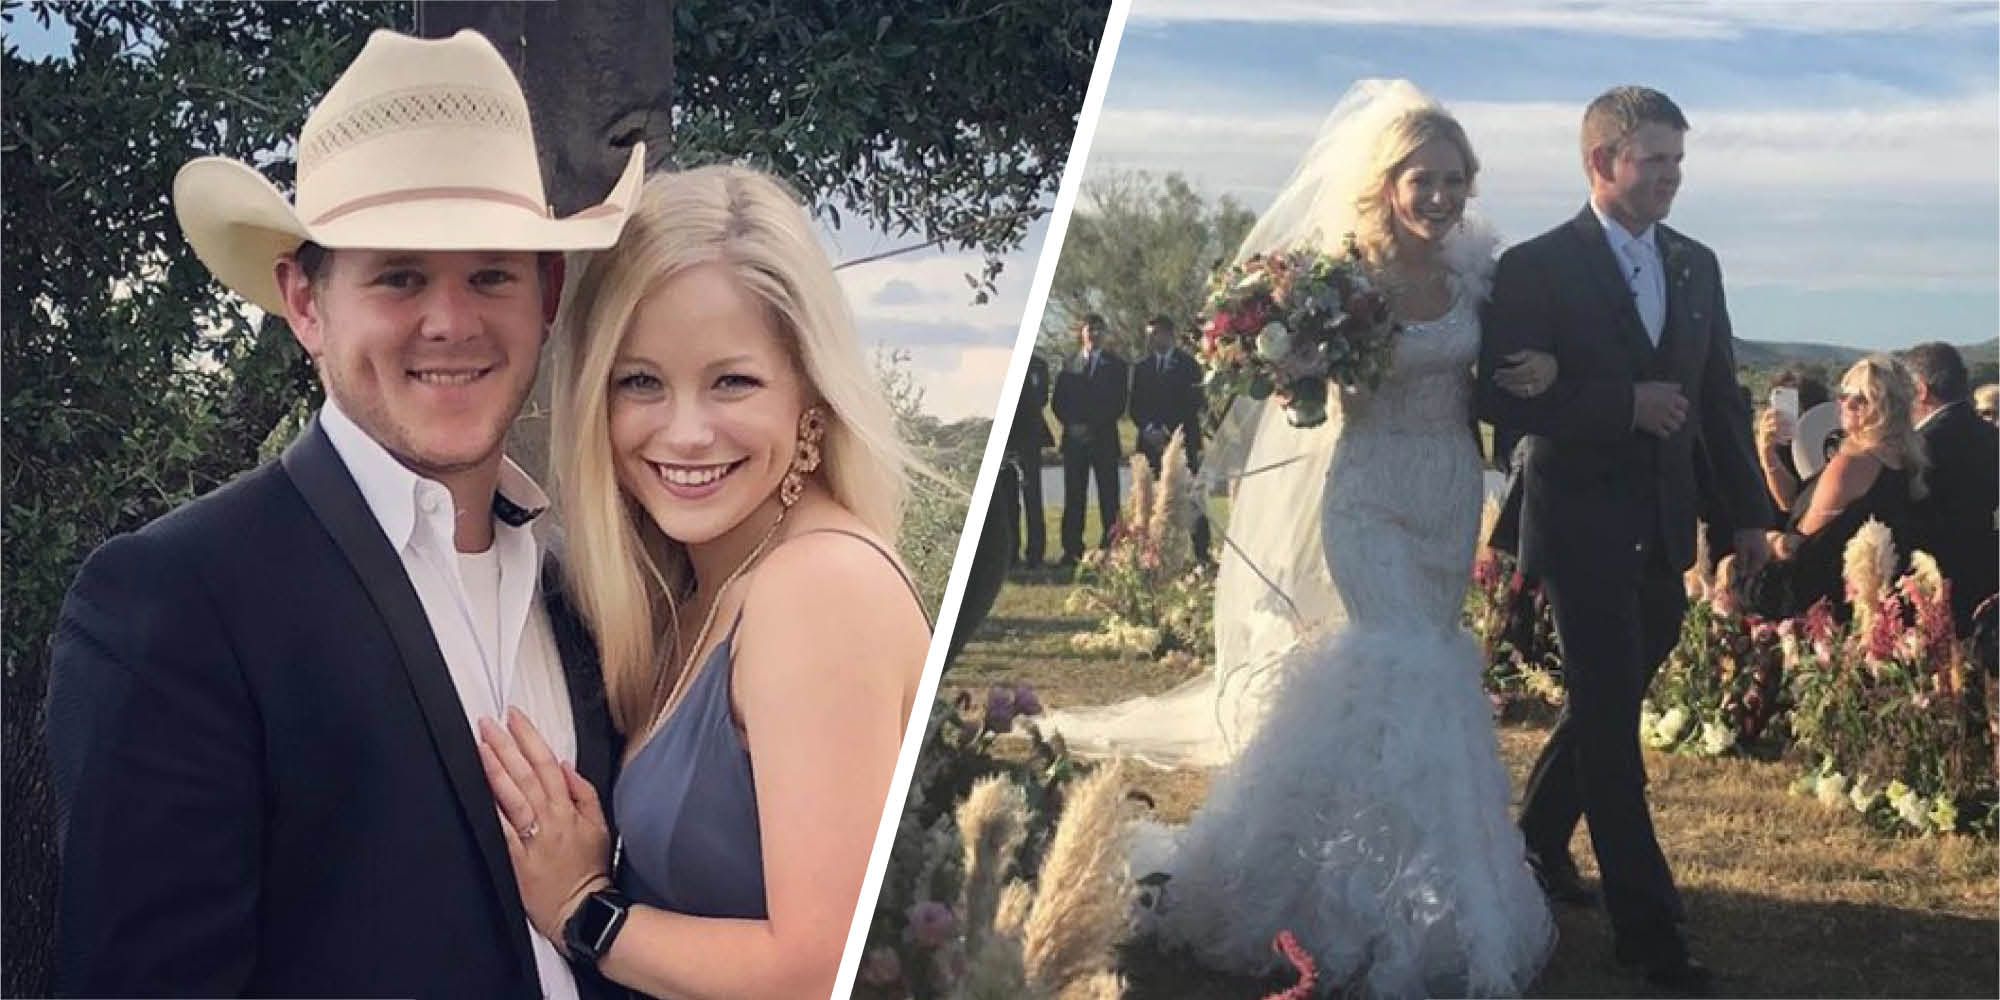 A Newlywed Couple Died In A Helicopter Crash Just Hours After